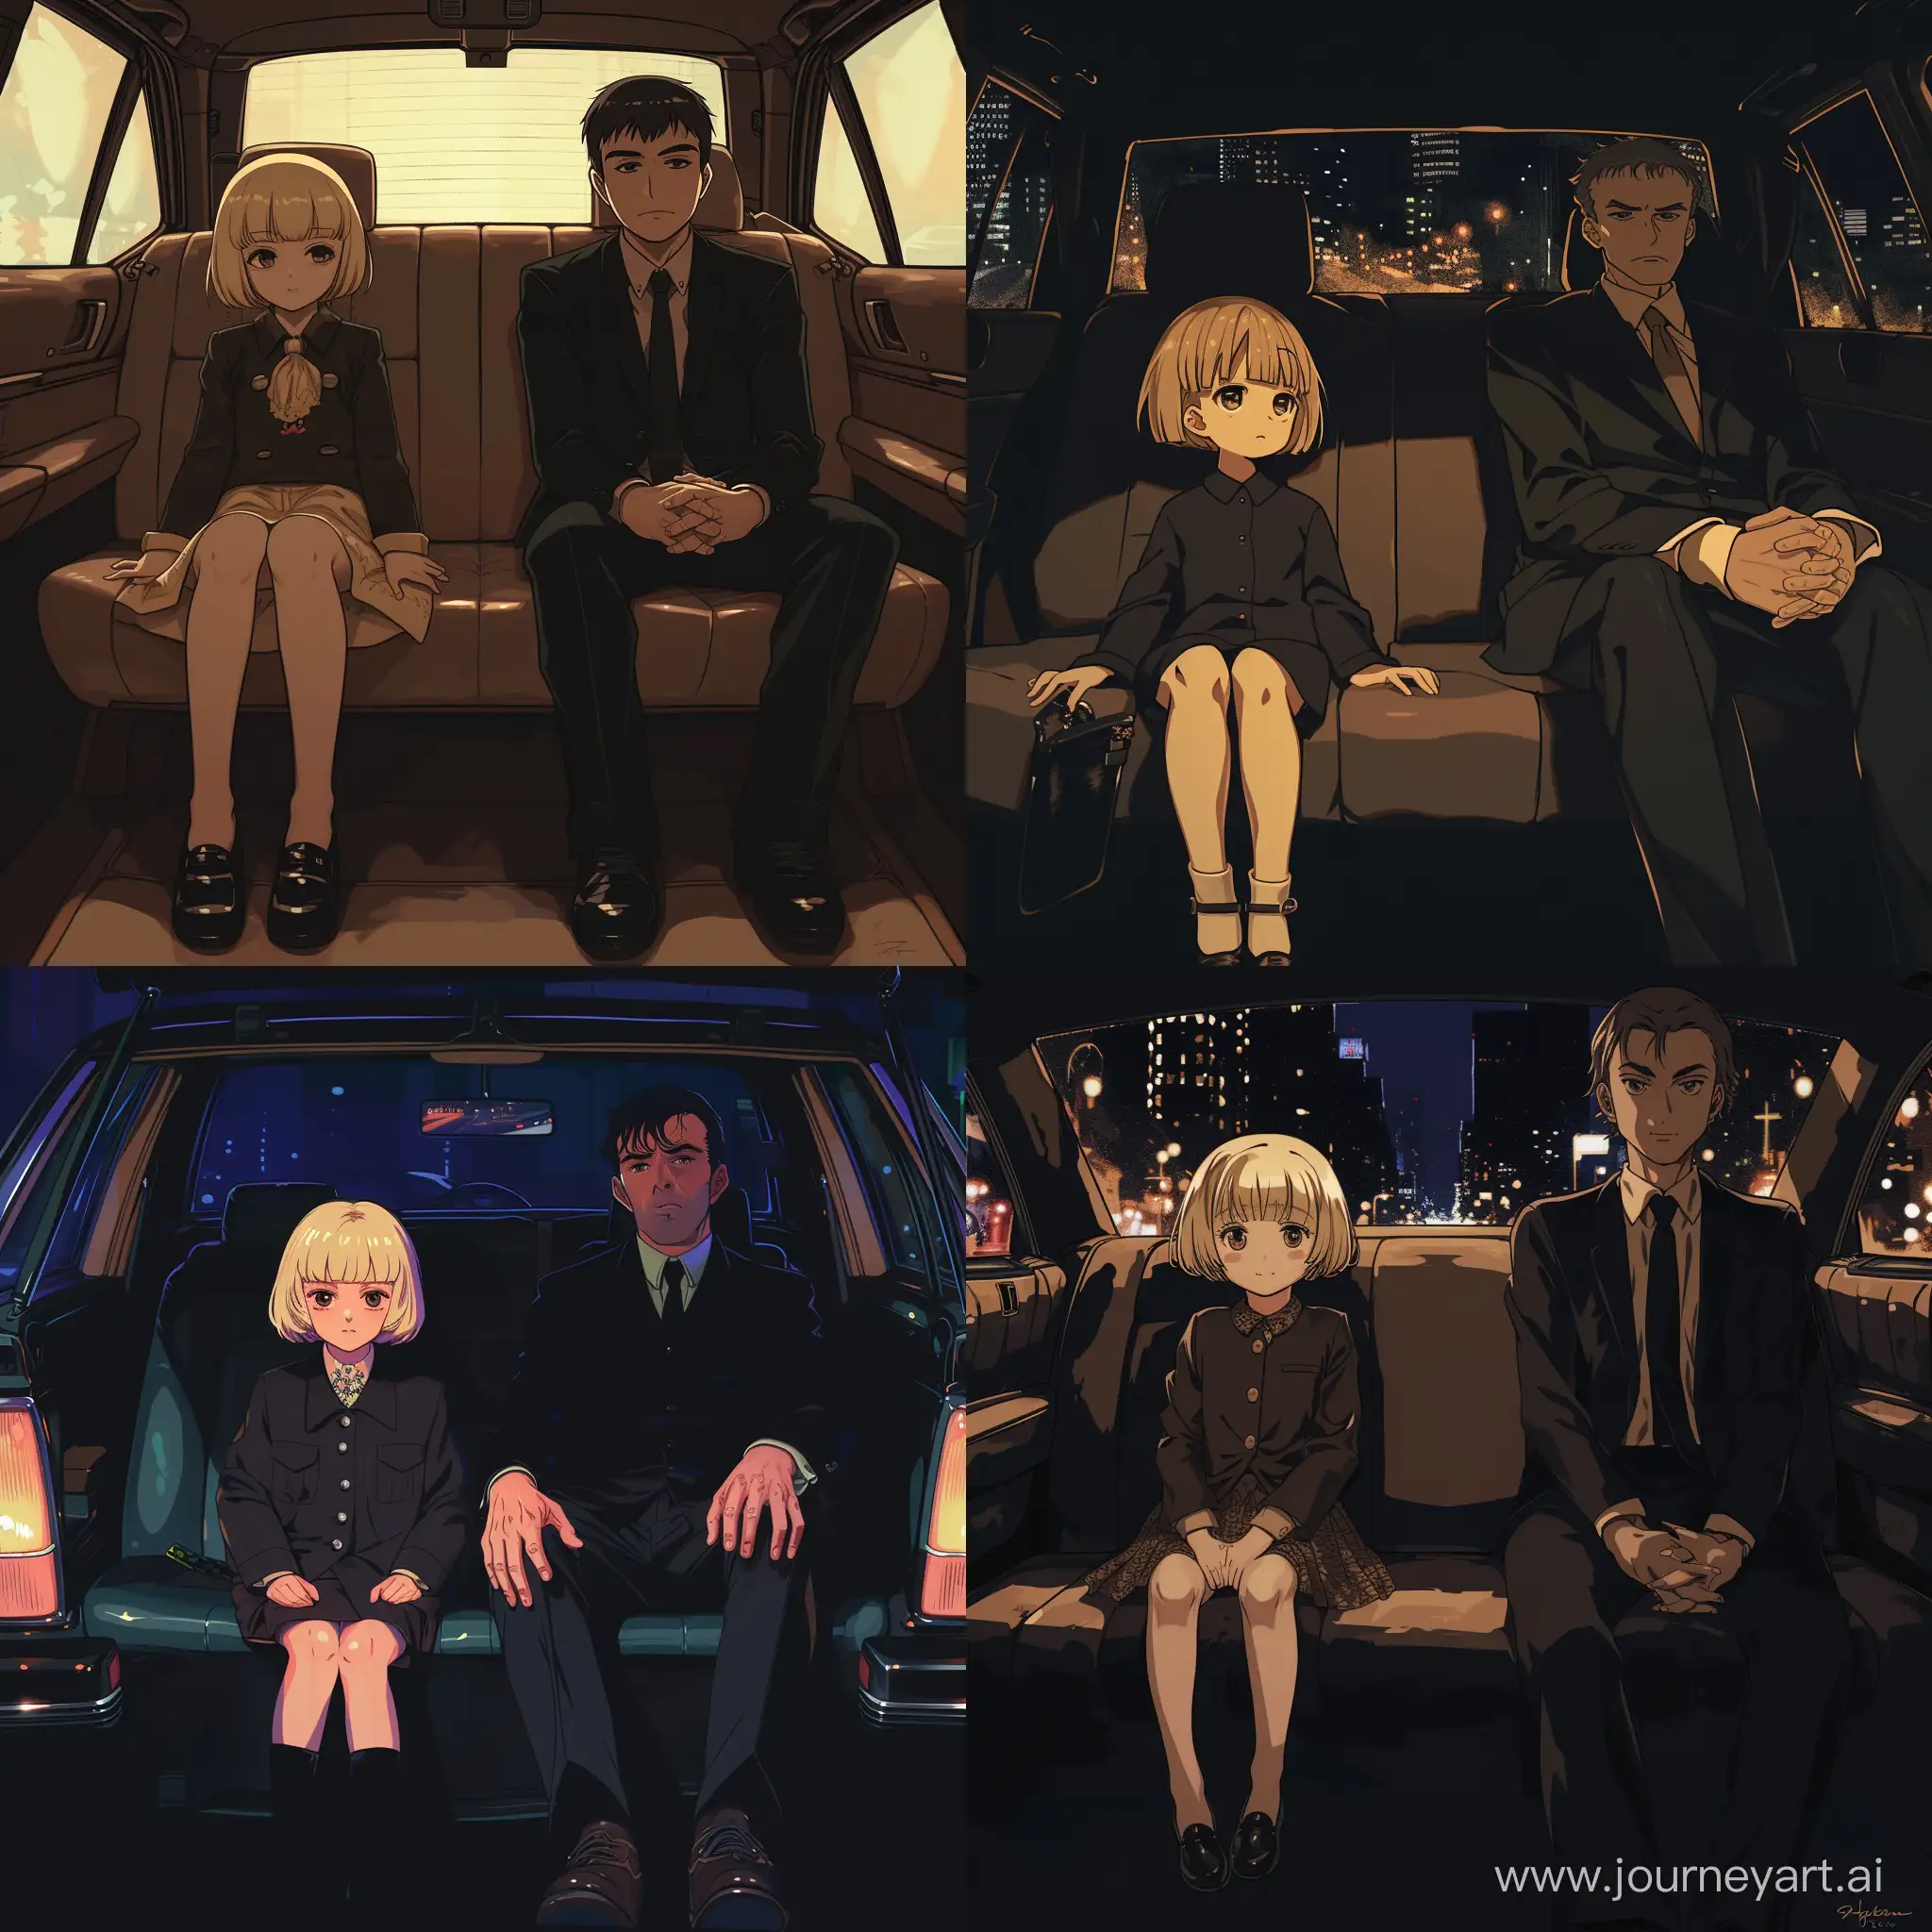 90s anime style of a two persons sitting in the back of the car. On the left is a cute little girl with a short blonde hair, on the right is a man in a black suit